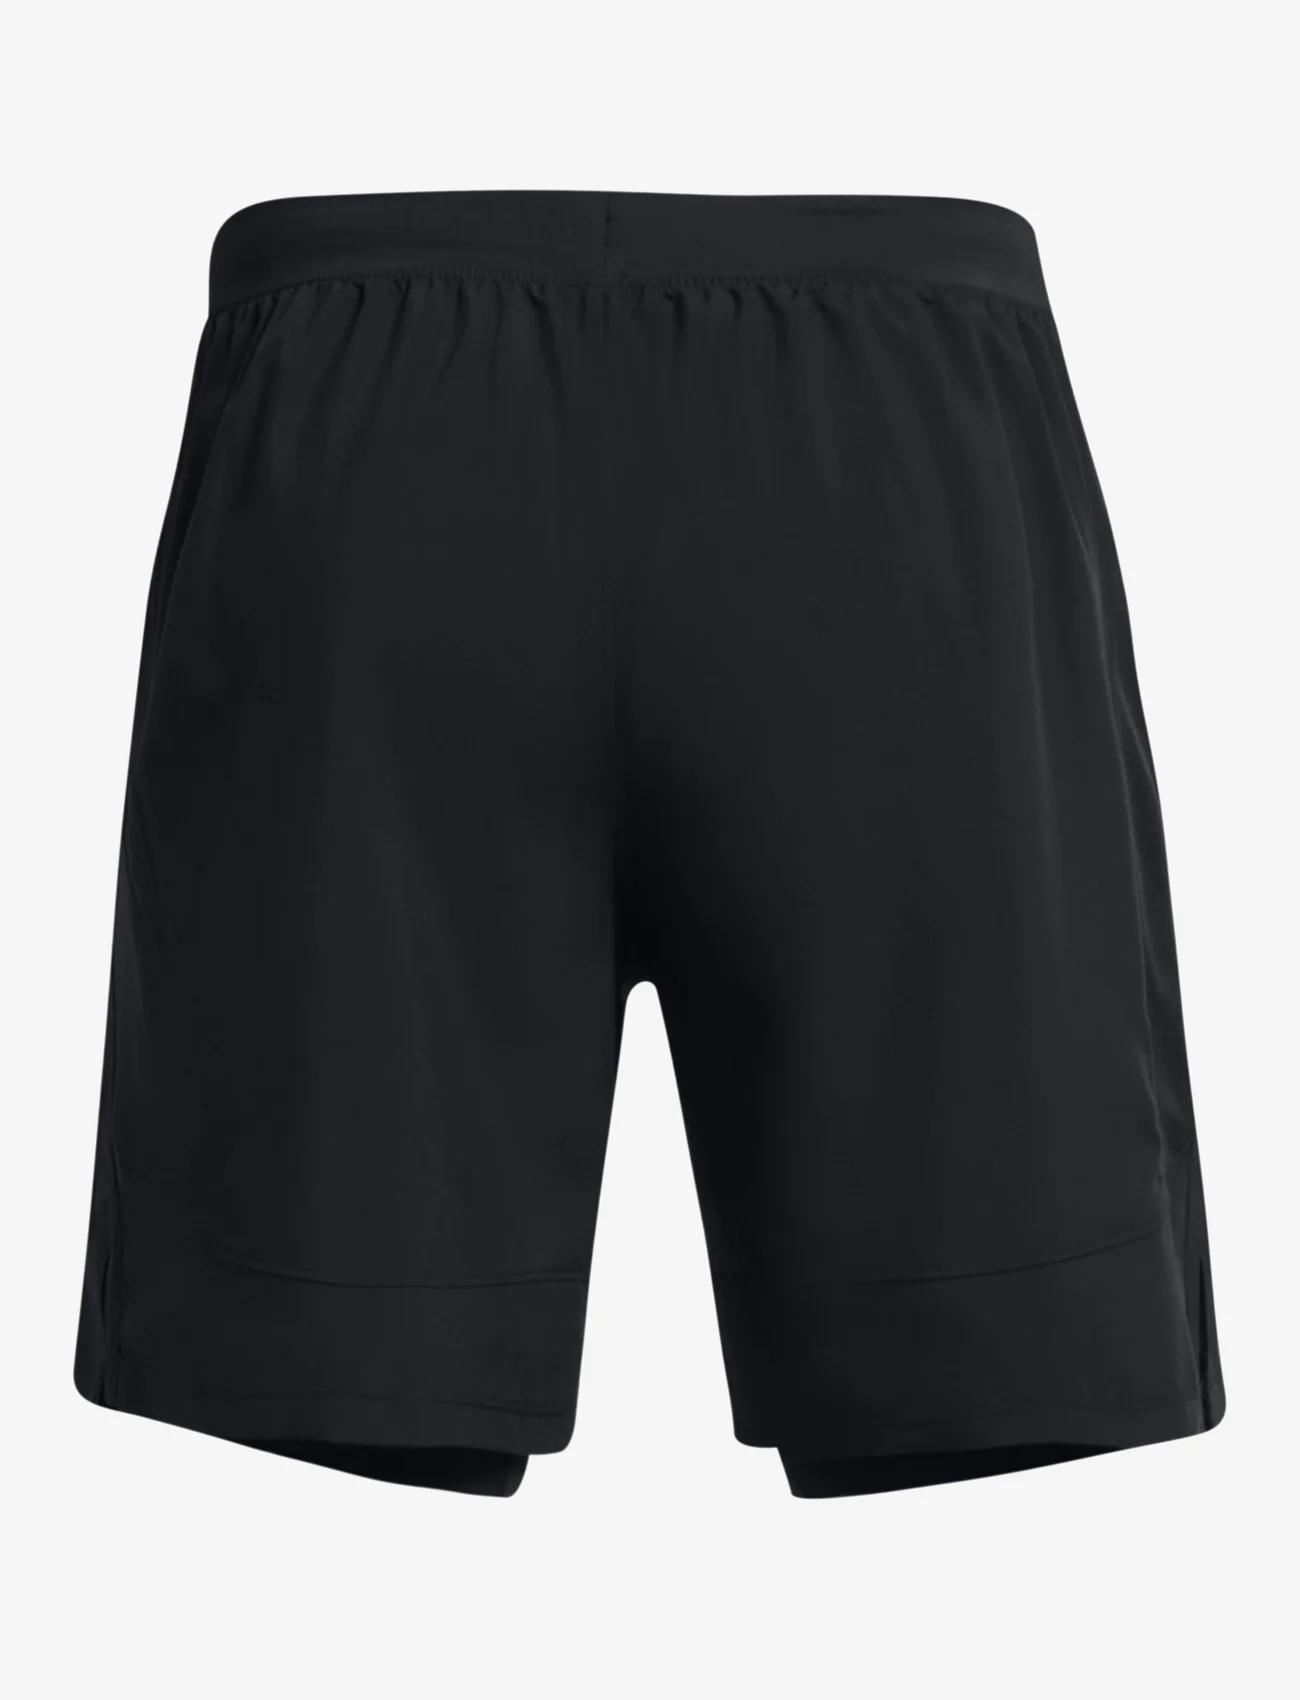 Under Armour - UA LAUNCH 7'' 2-IN-1 SHORTS - treningsshorts - black - 1